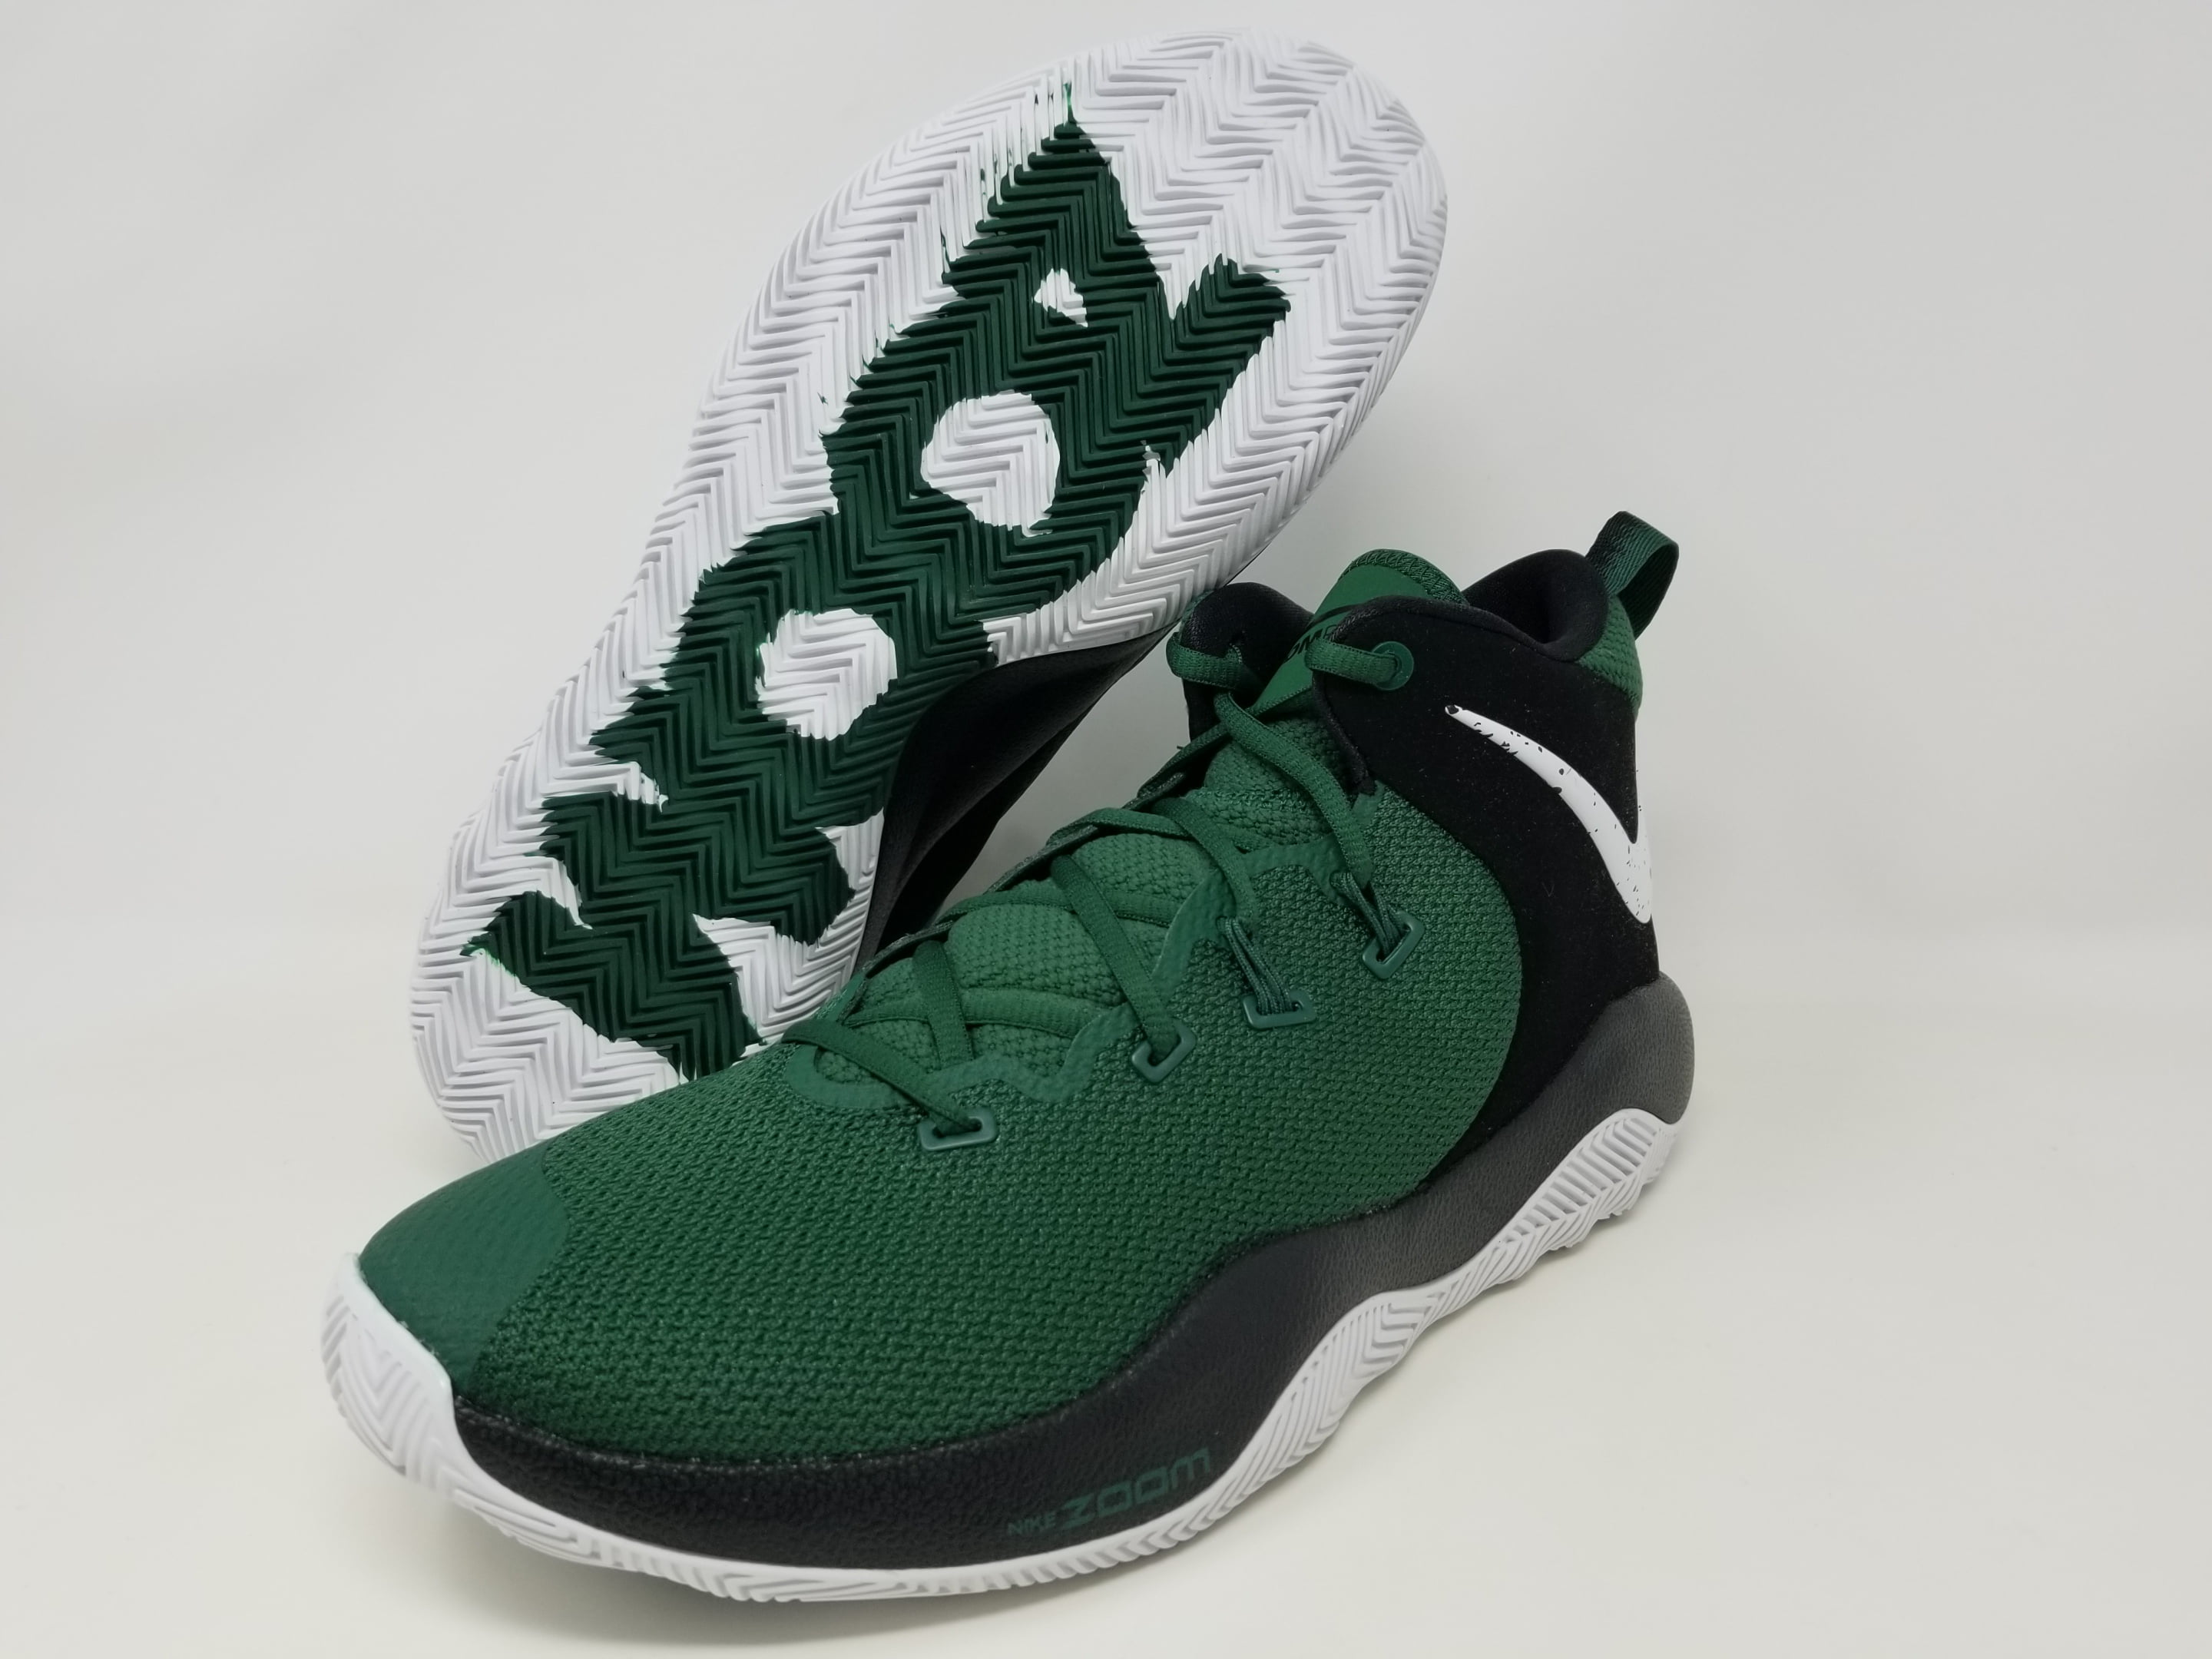 green and black nike basketball shoes